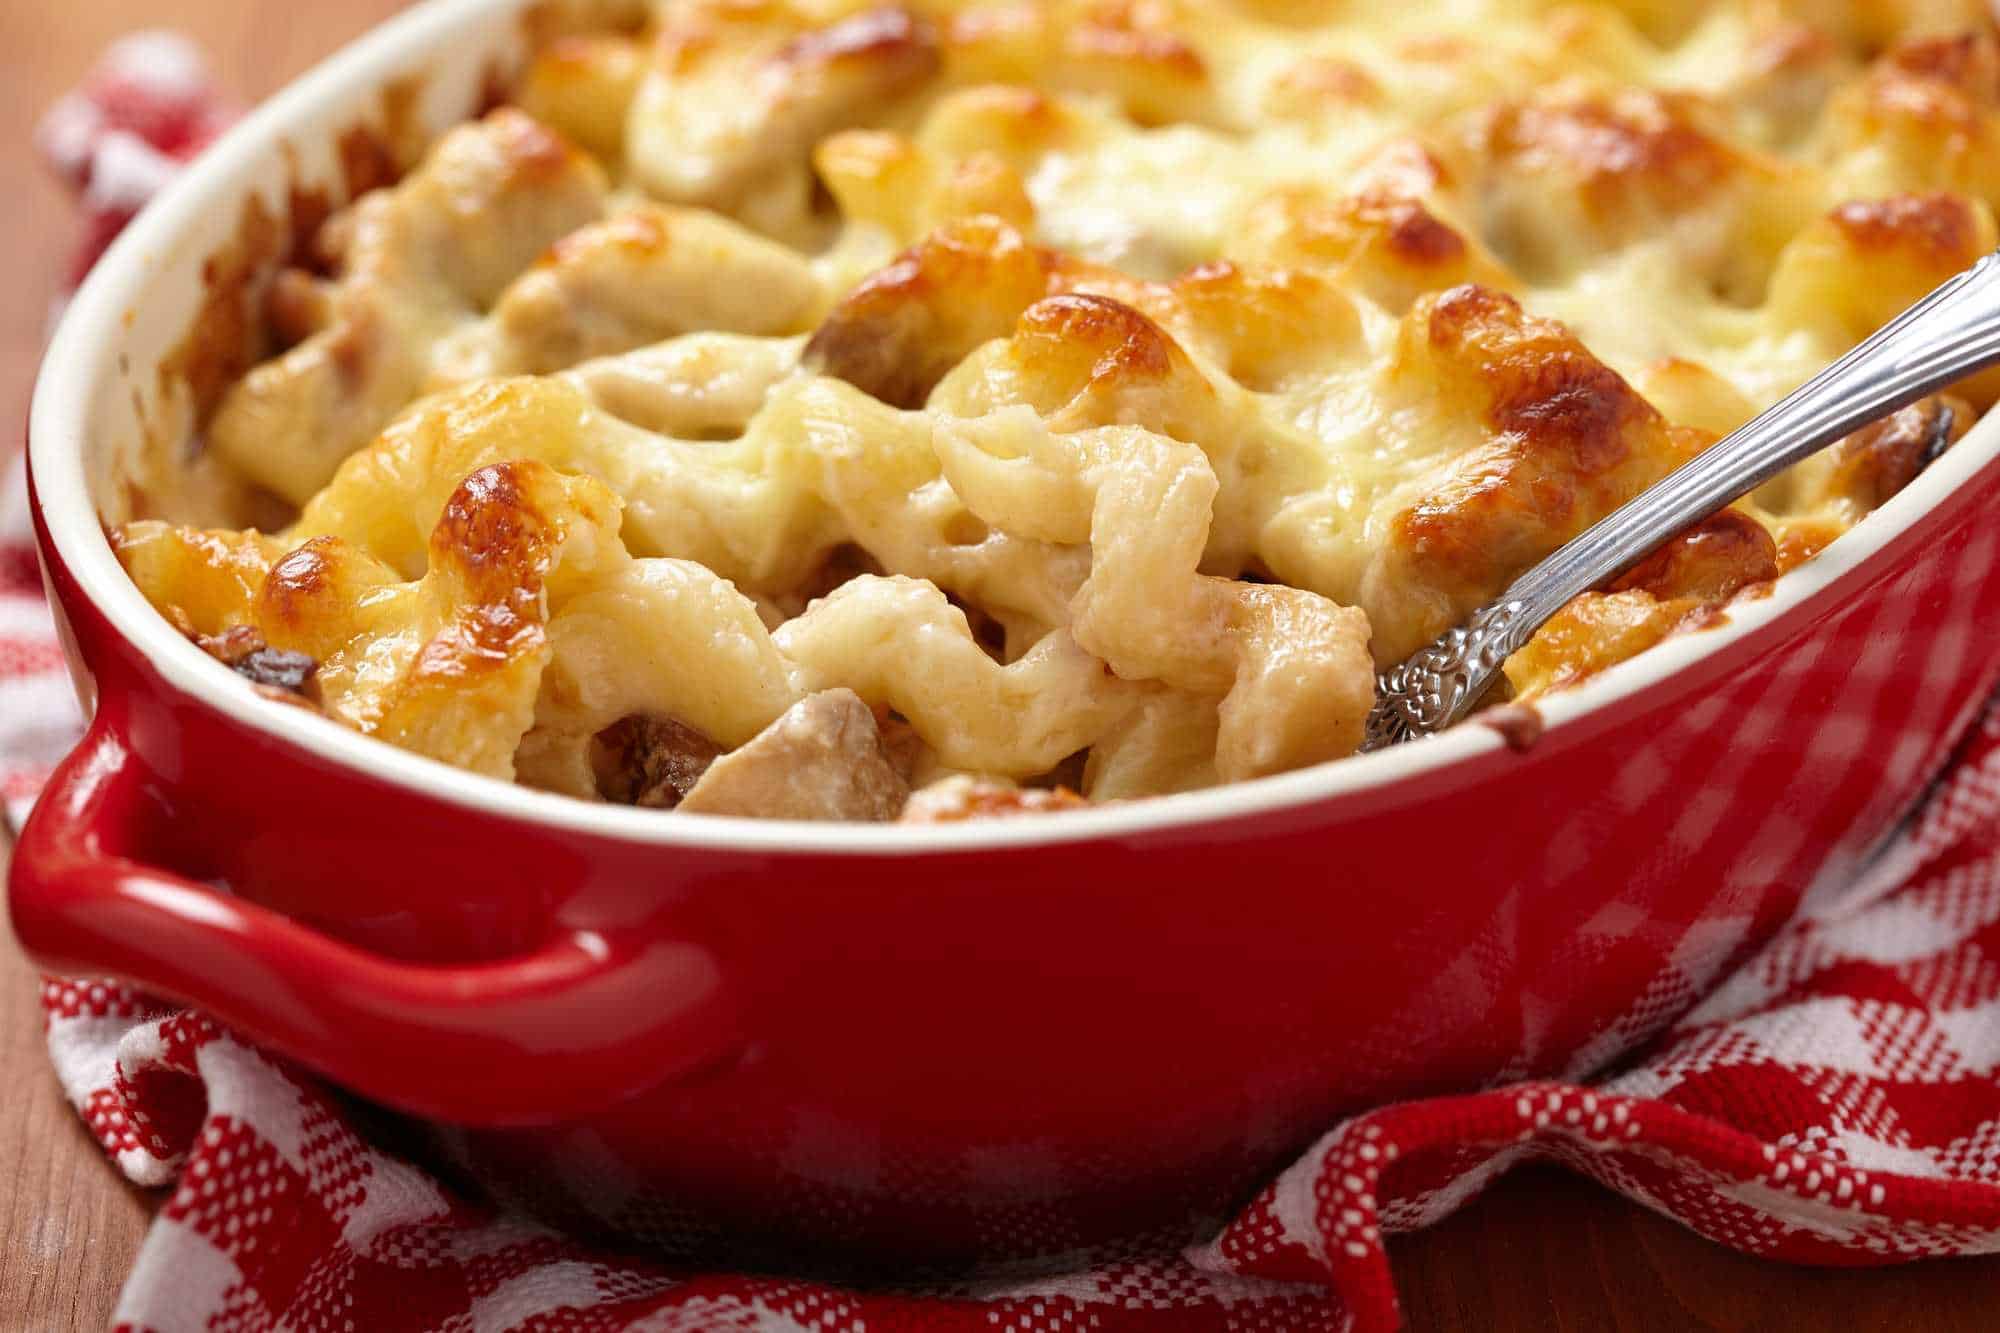 this is british style mac and cheese